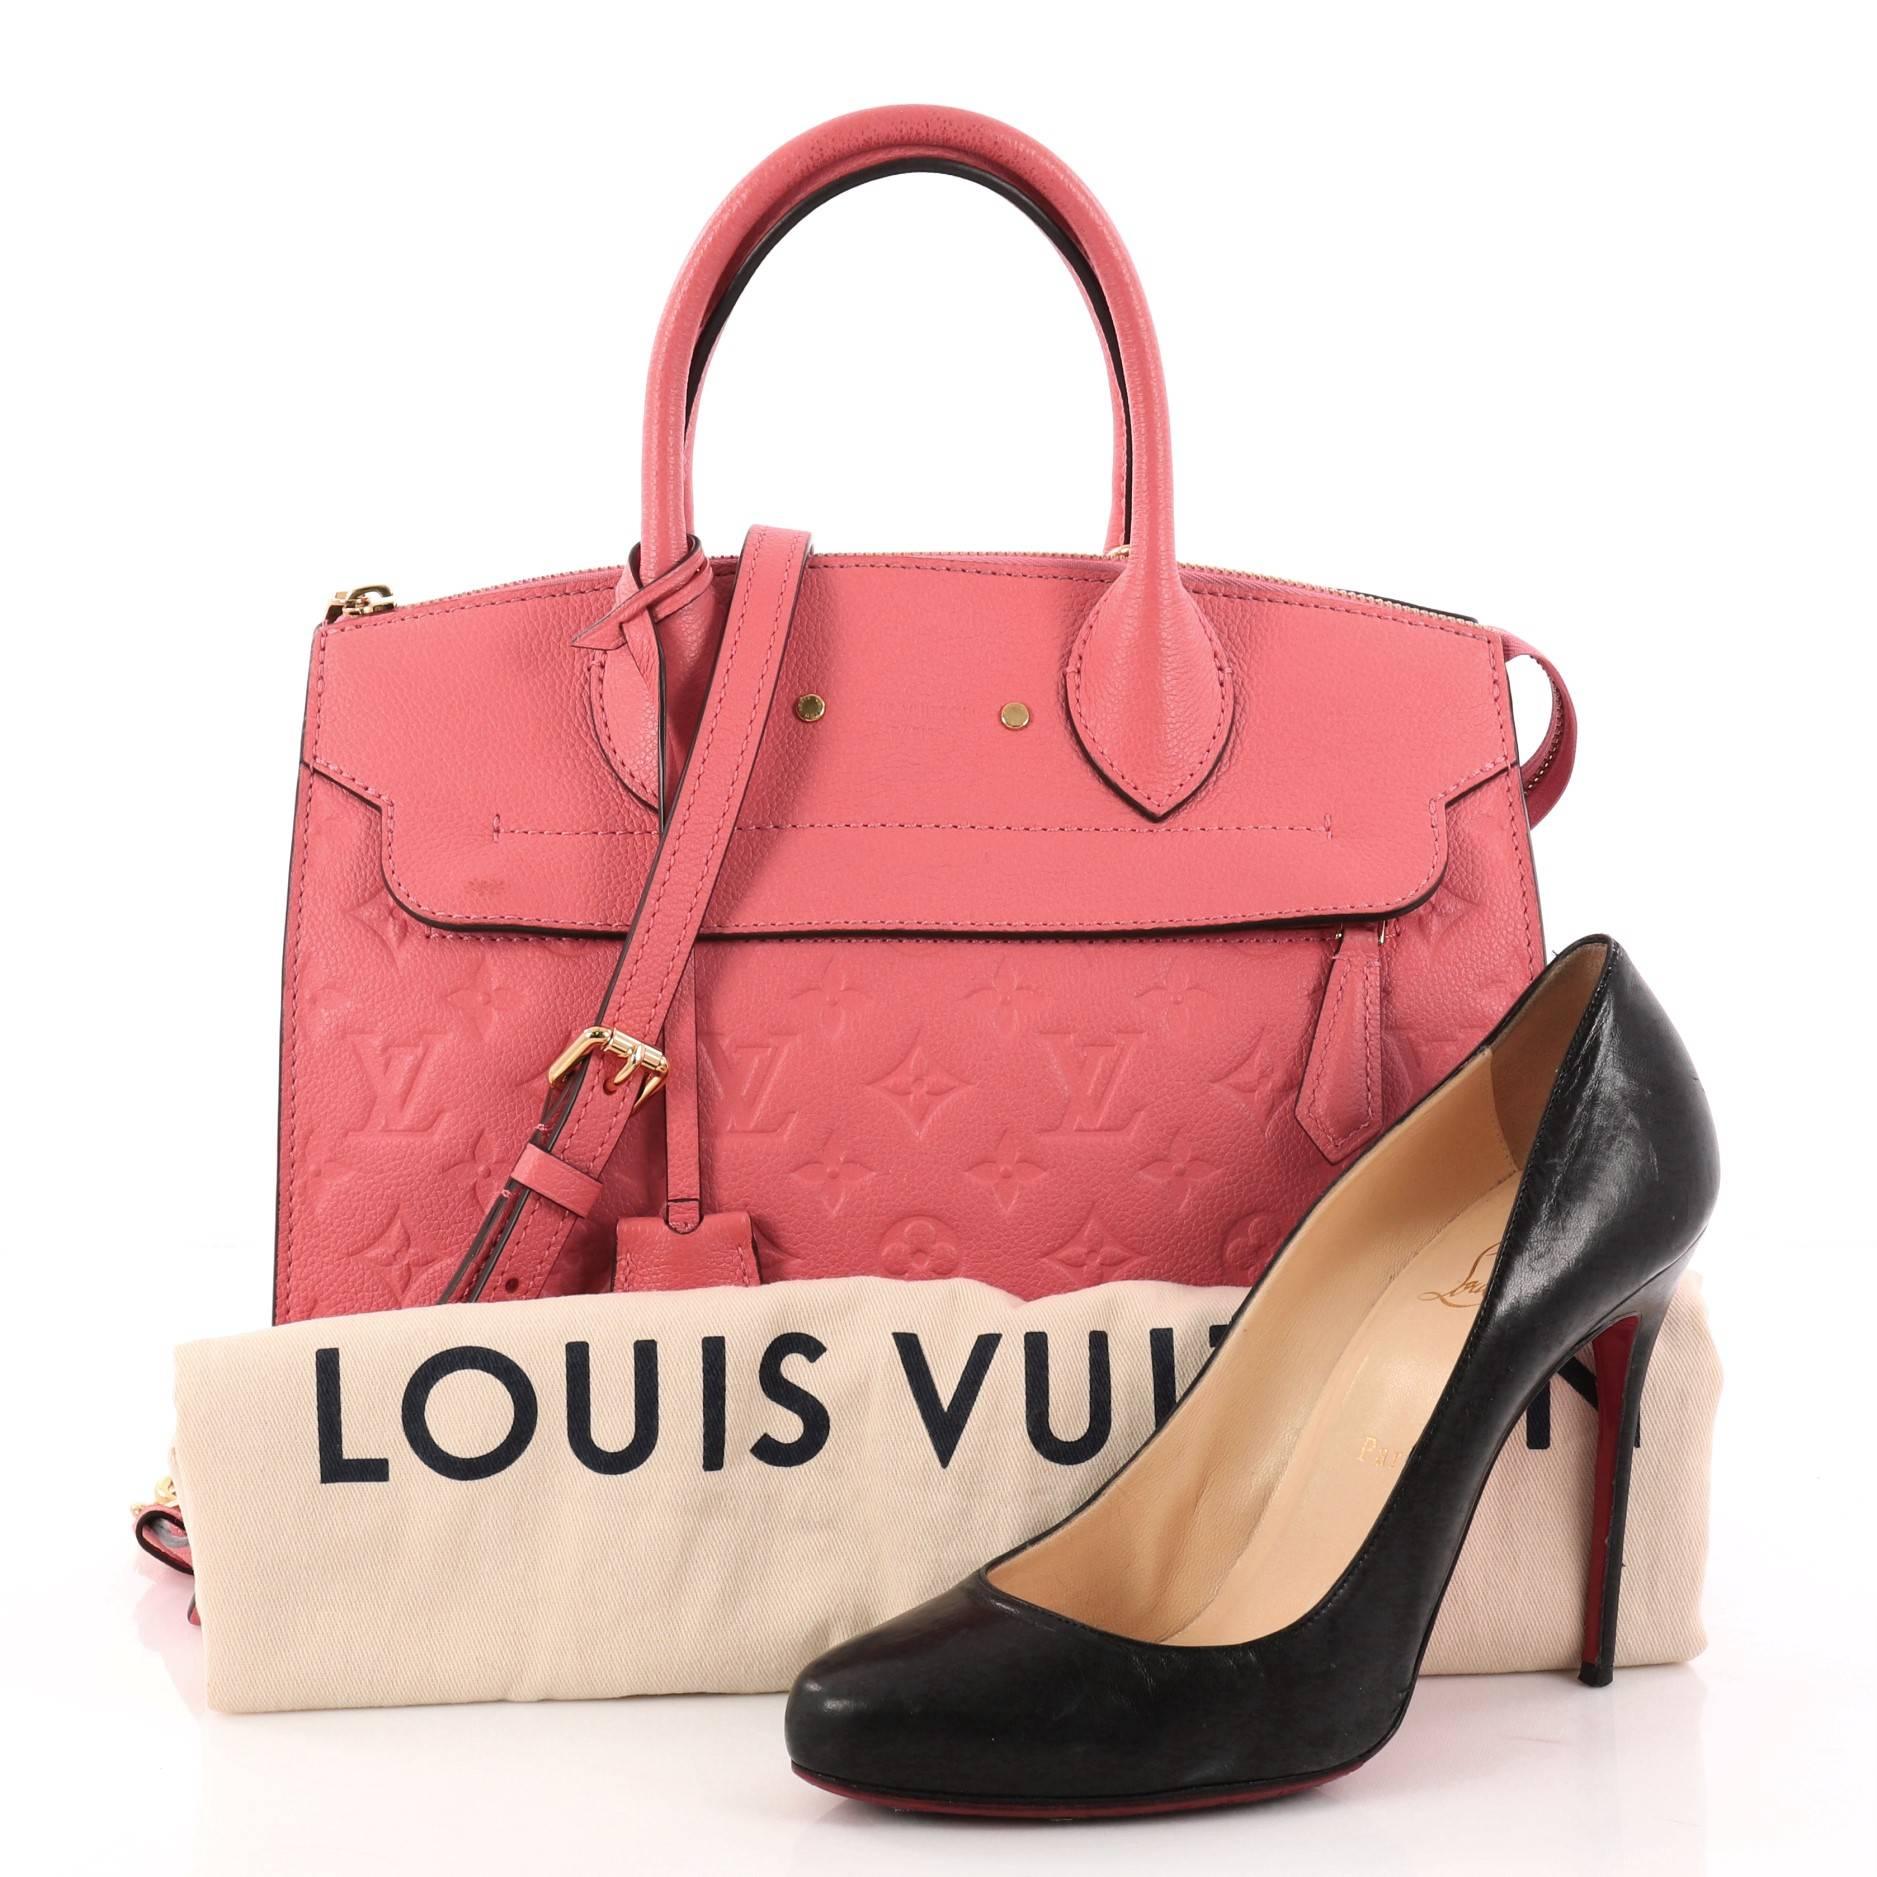 This authentic Louis Vuitton Pont Neuf Handbag Monogram Empreinte Leather MM is a modern structured bag. Constructed in sturdy pink monogram empreinte leather, this simple and functional bag showcases dual rolled leather handles, protective base